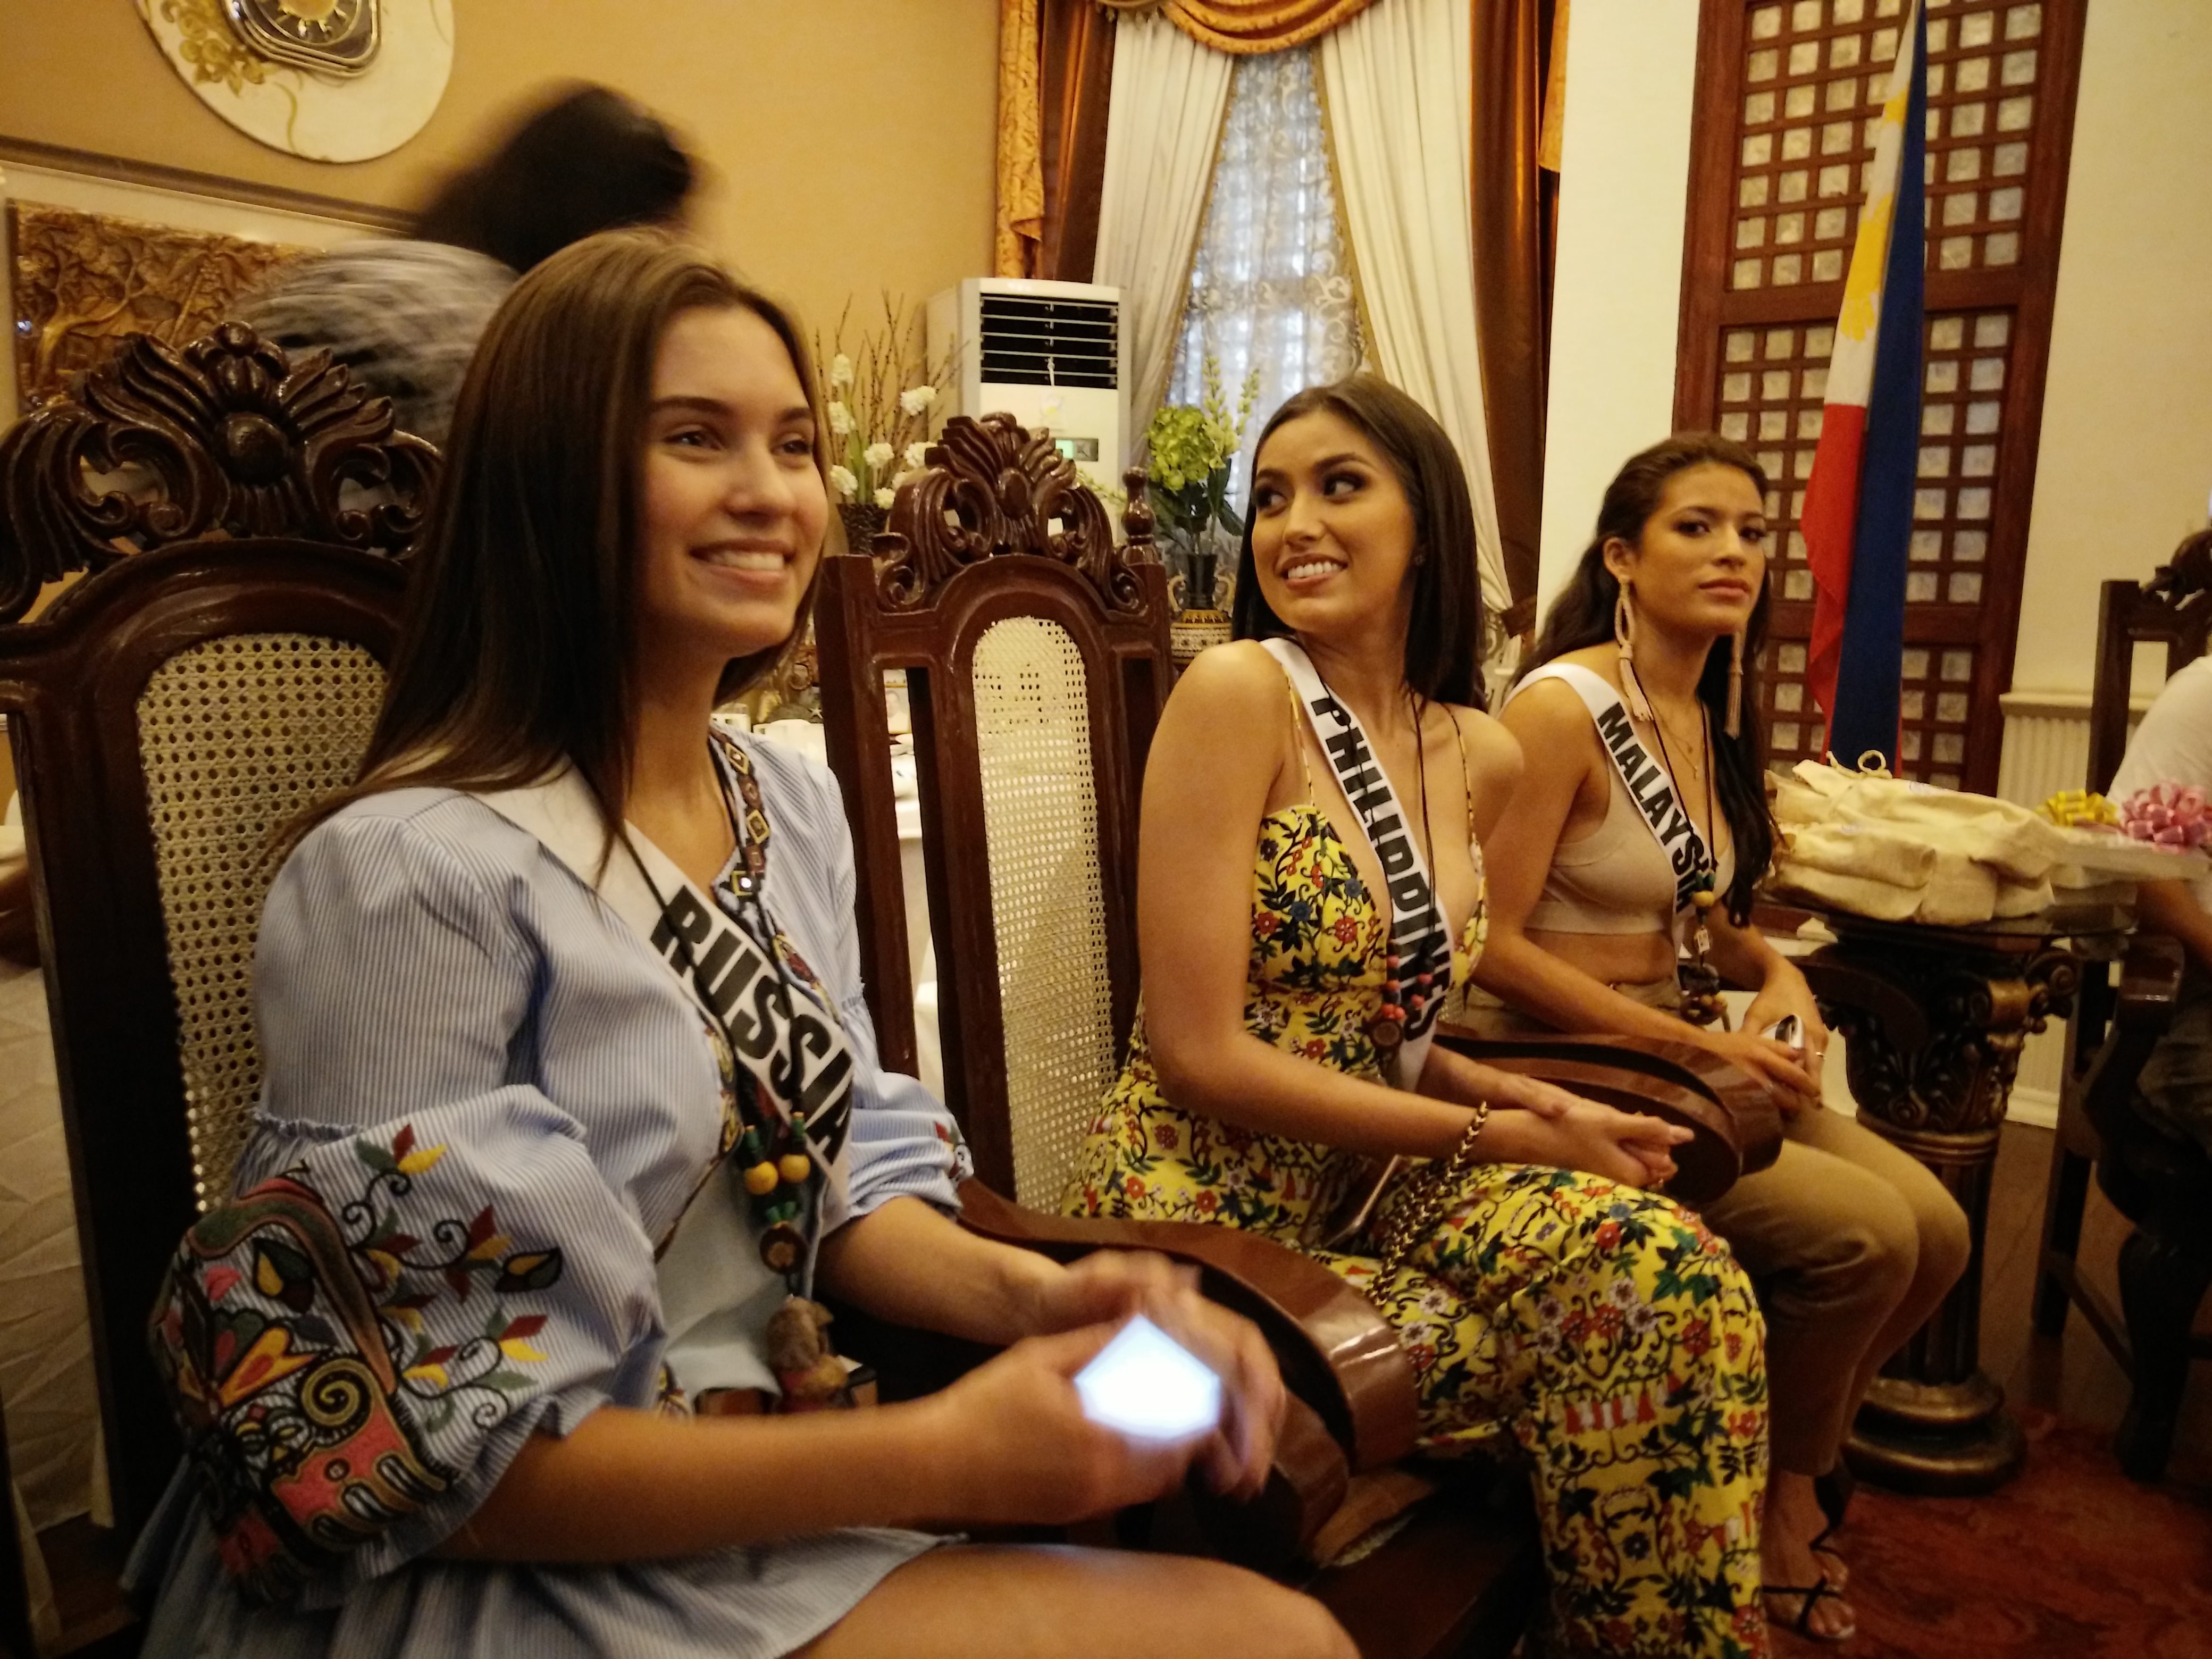 Rachel Peters with Russia's Kseniya Alexandrova and Malaysia's Samantha James are given an official welcome in Bohol. Photo by Mike Ortega Ligalig/Rappler   